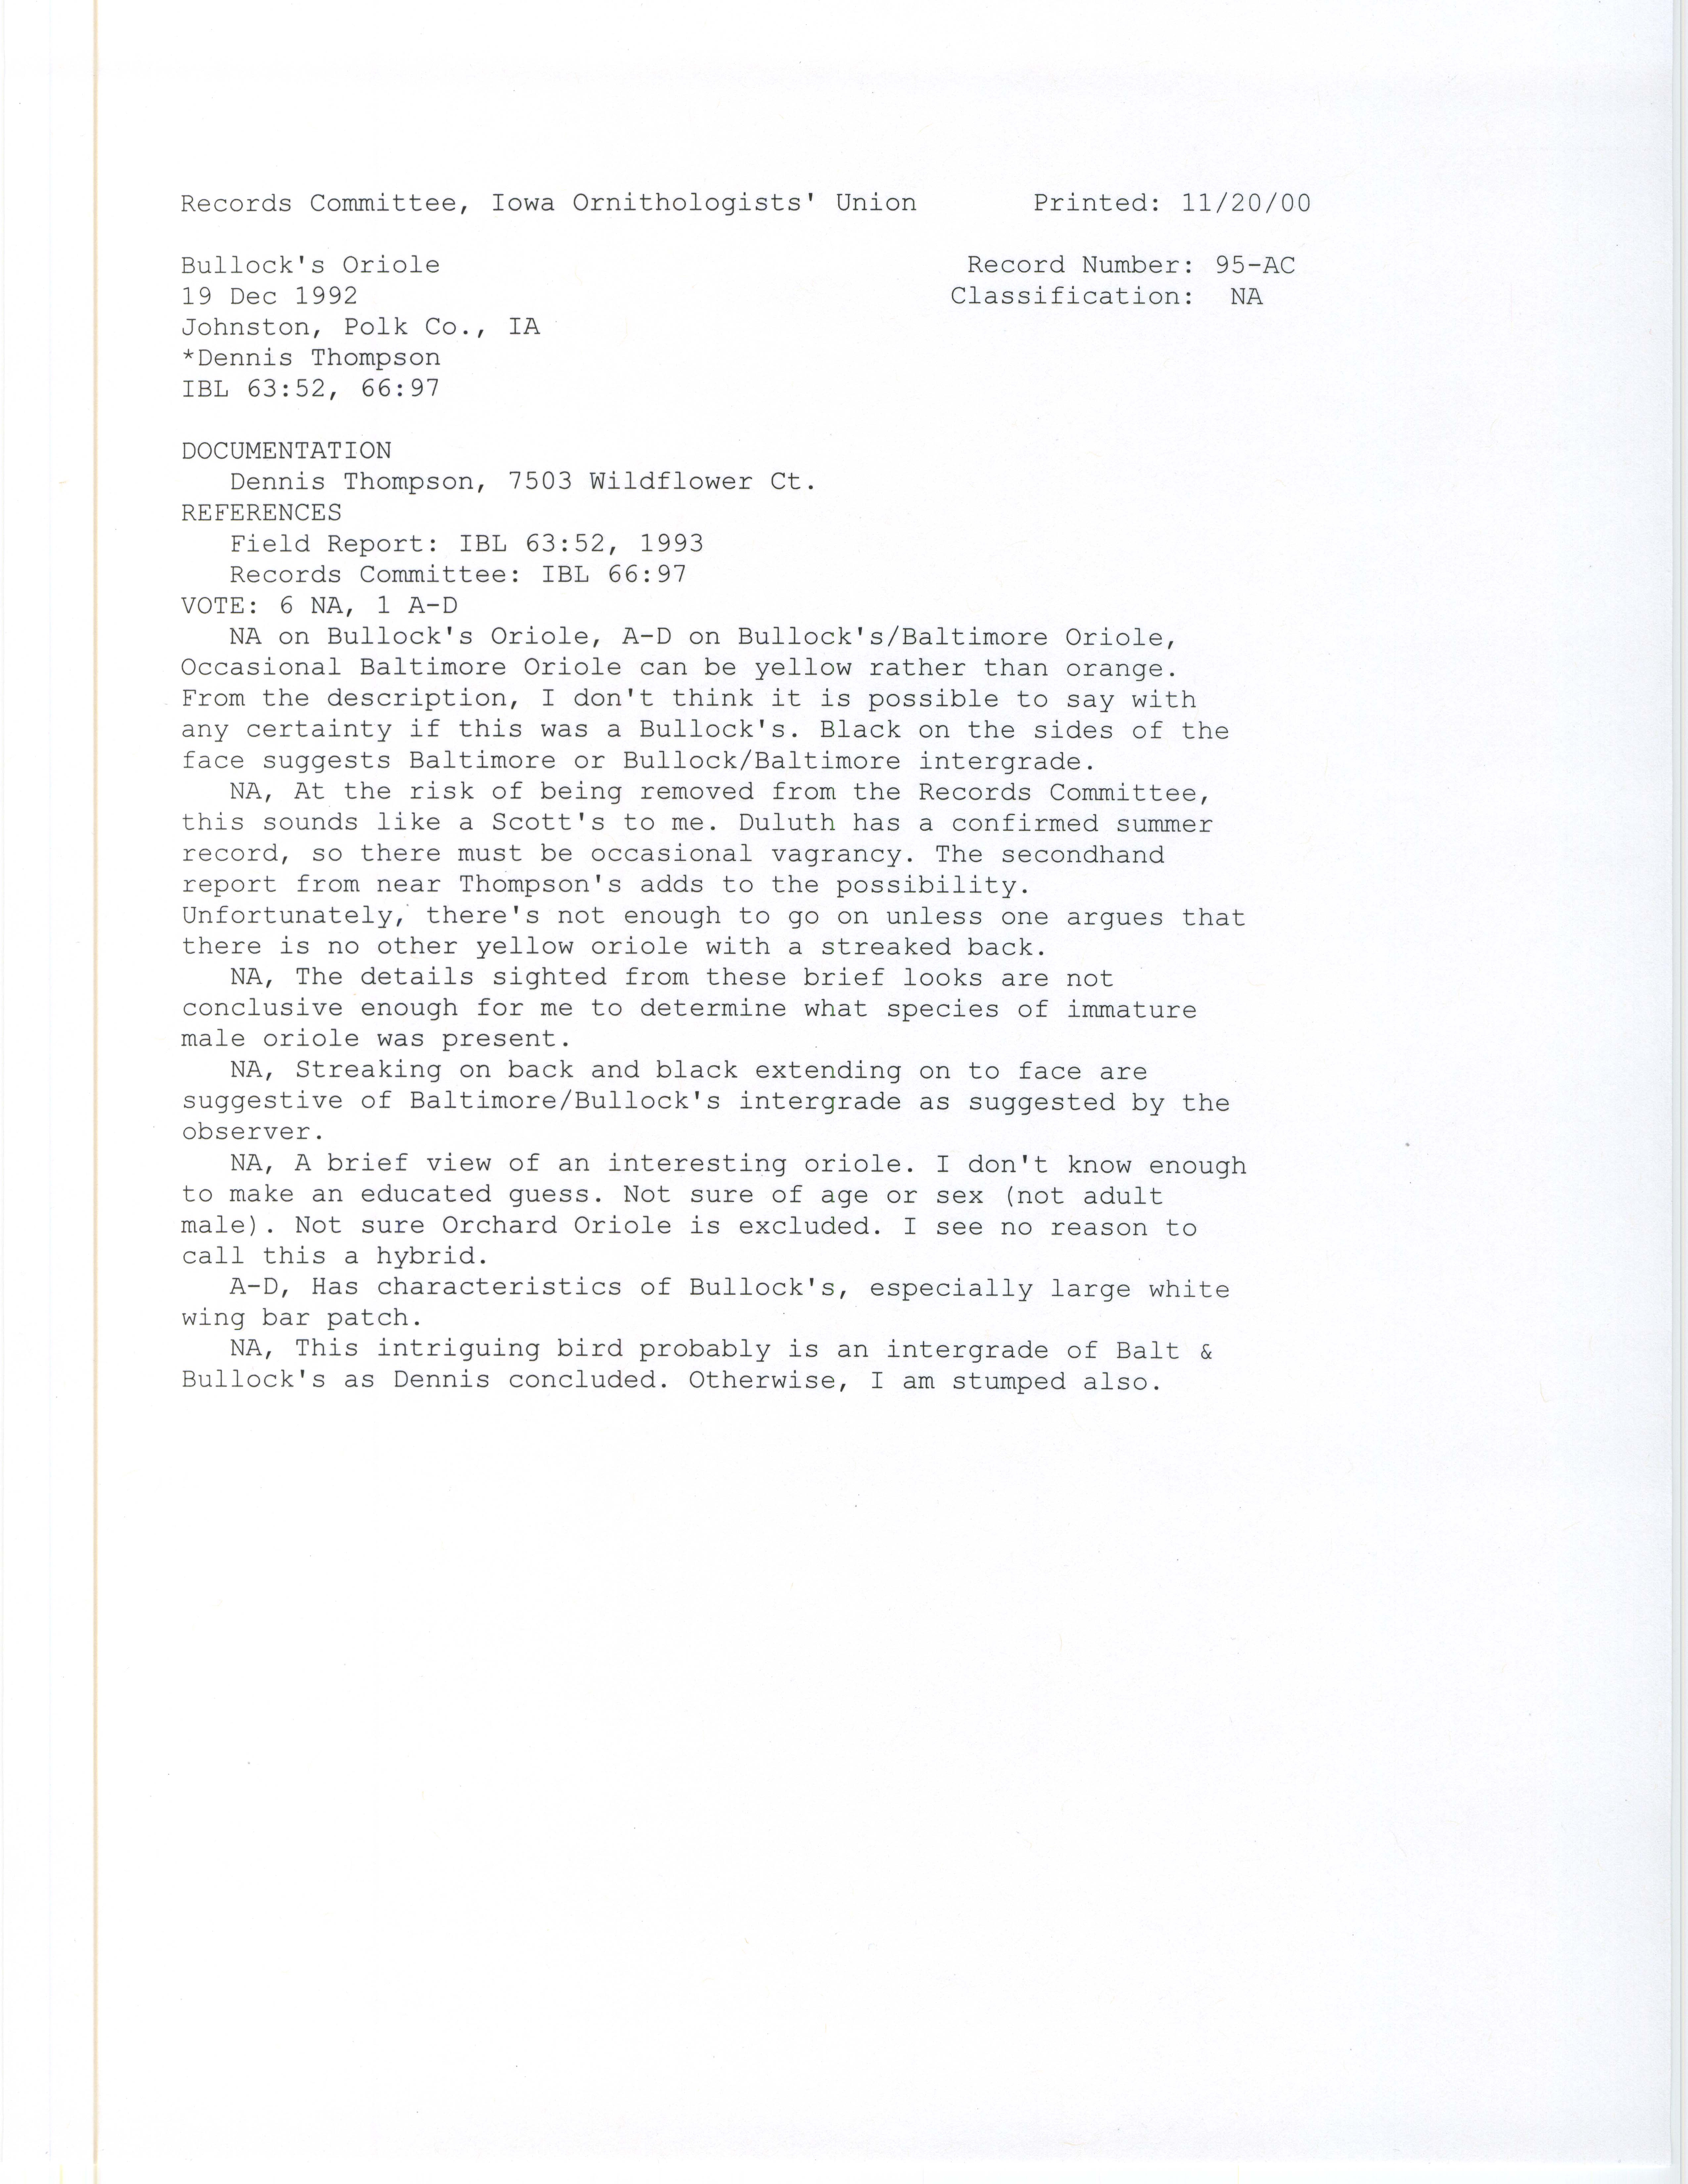 Records Committee review for rare bird sighting for Bullock's Oriole at Johnston, 1992